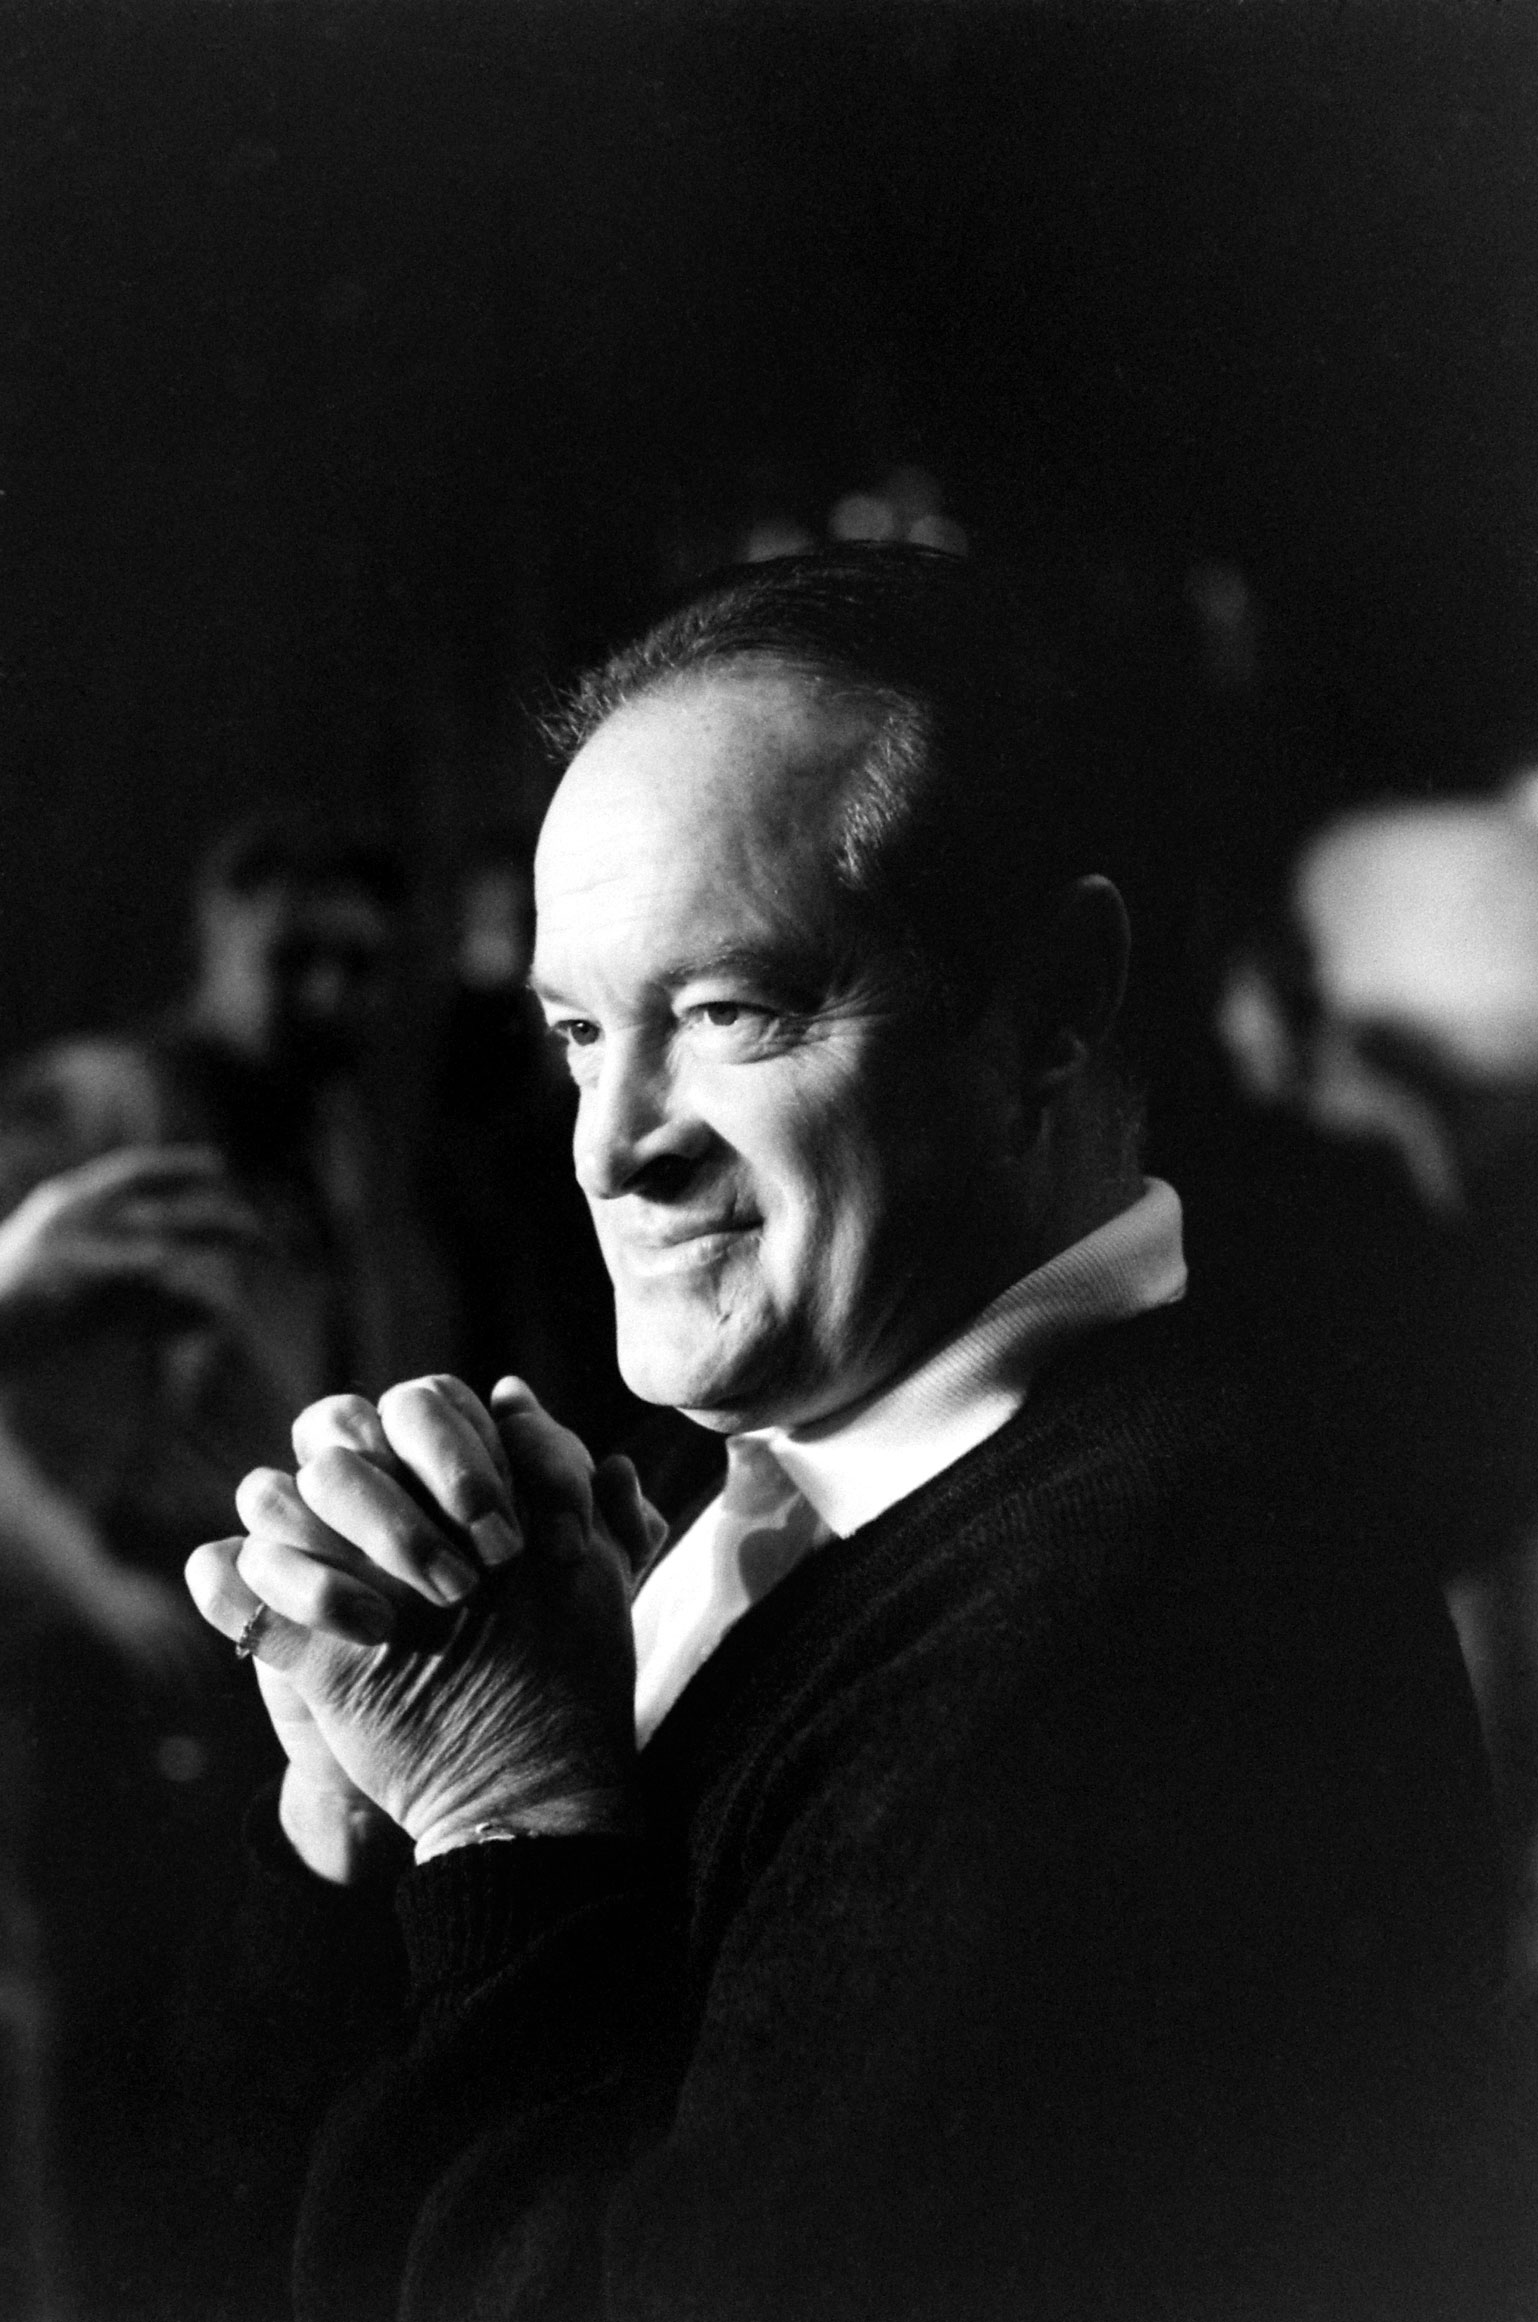 Bob Hope, photographed in a quiet moment at the 1958 Oscar rehearsals. According to notes taken during Leonard McCombe's photo shoot, Hope cracked up the likes of Clark Gable and Cary Grant with new material: "Tovarich Hope, newly returned from Moscow, unlimbers his Russian jokes."